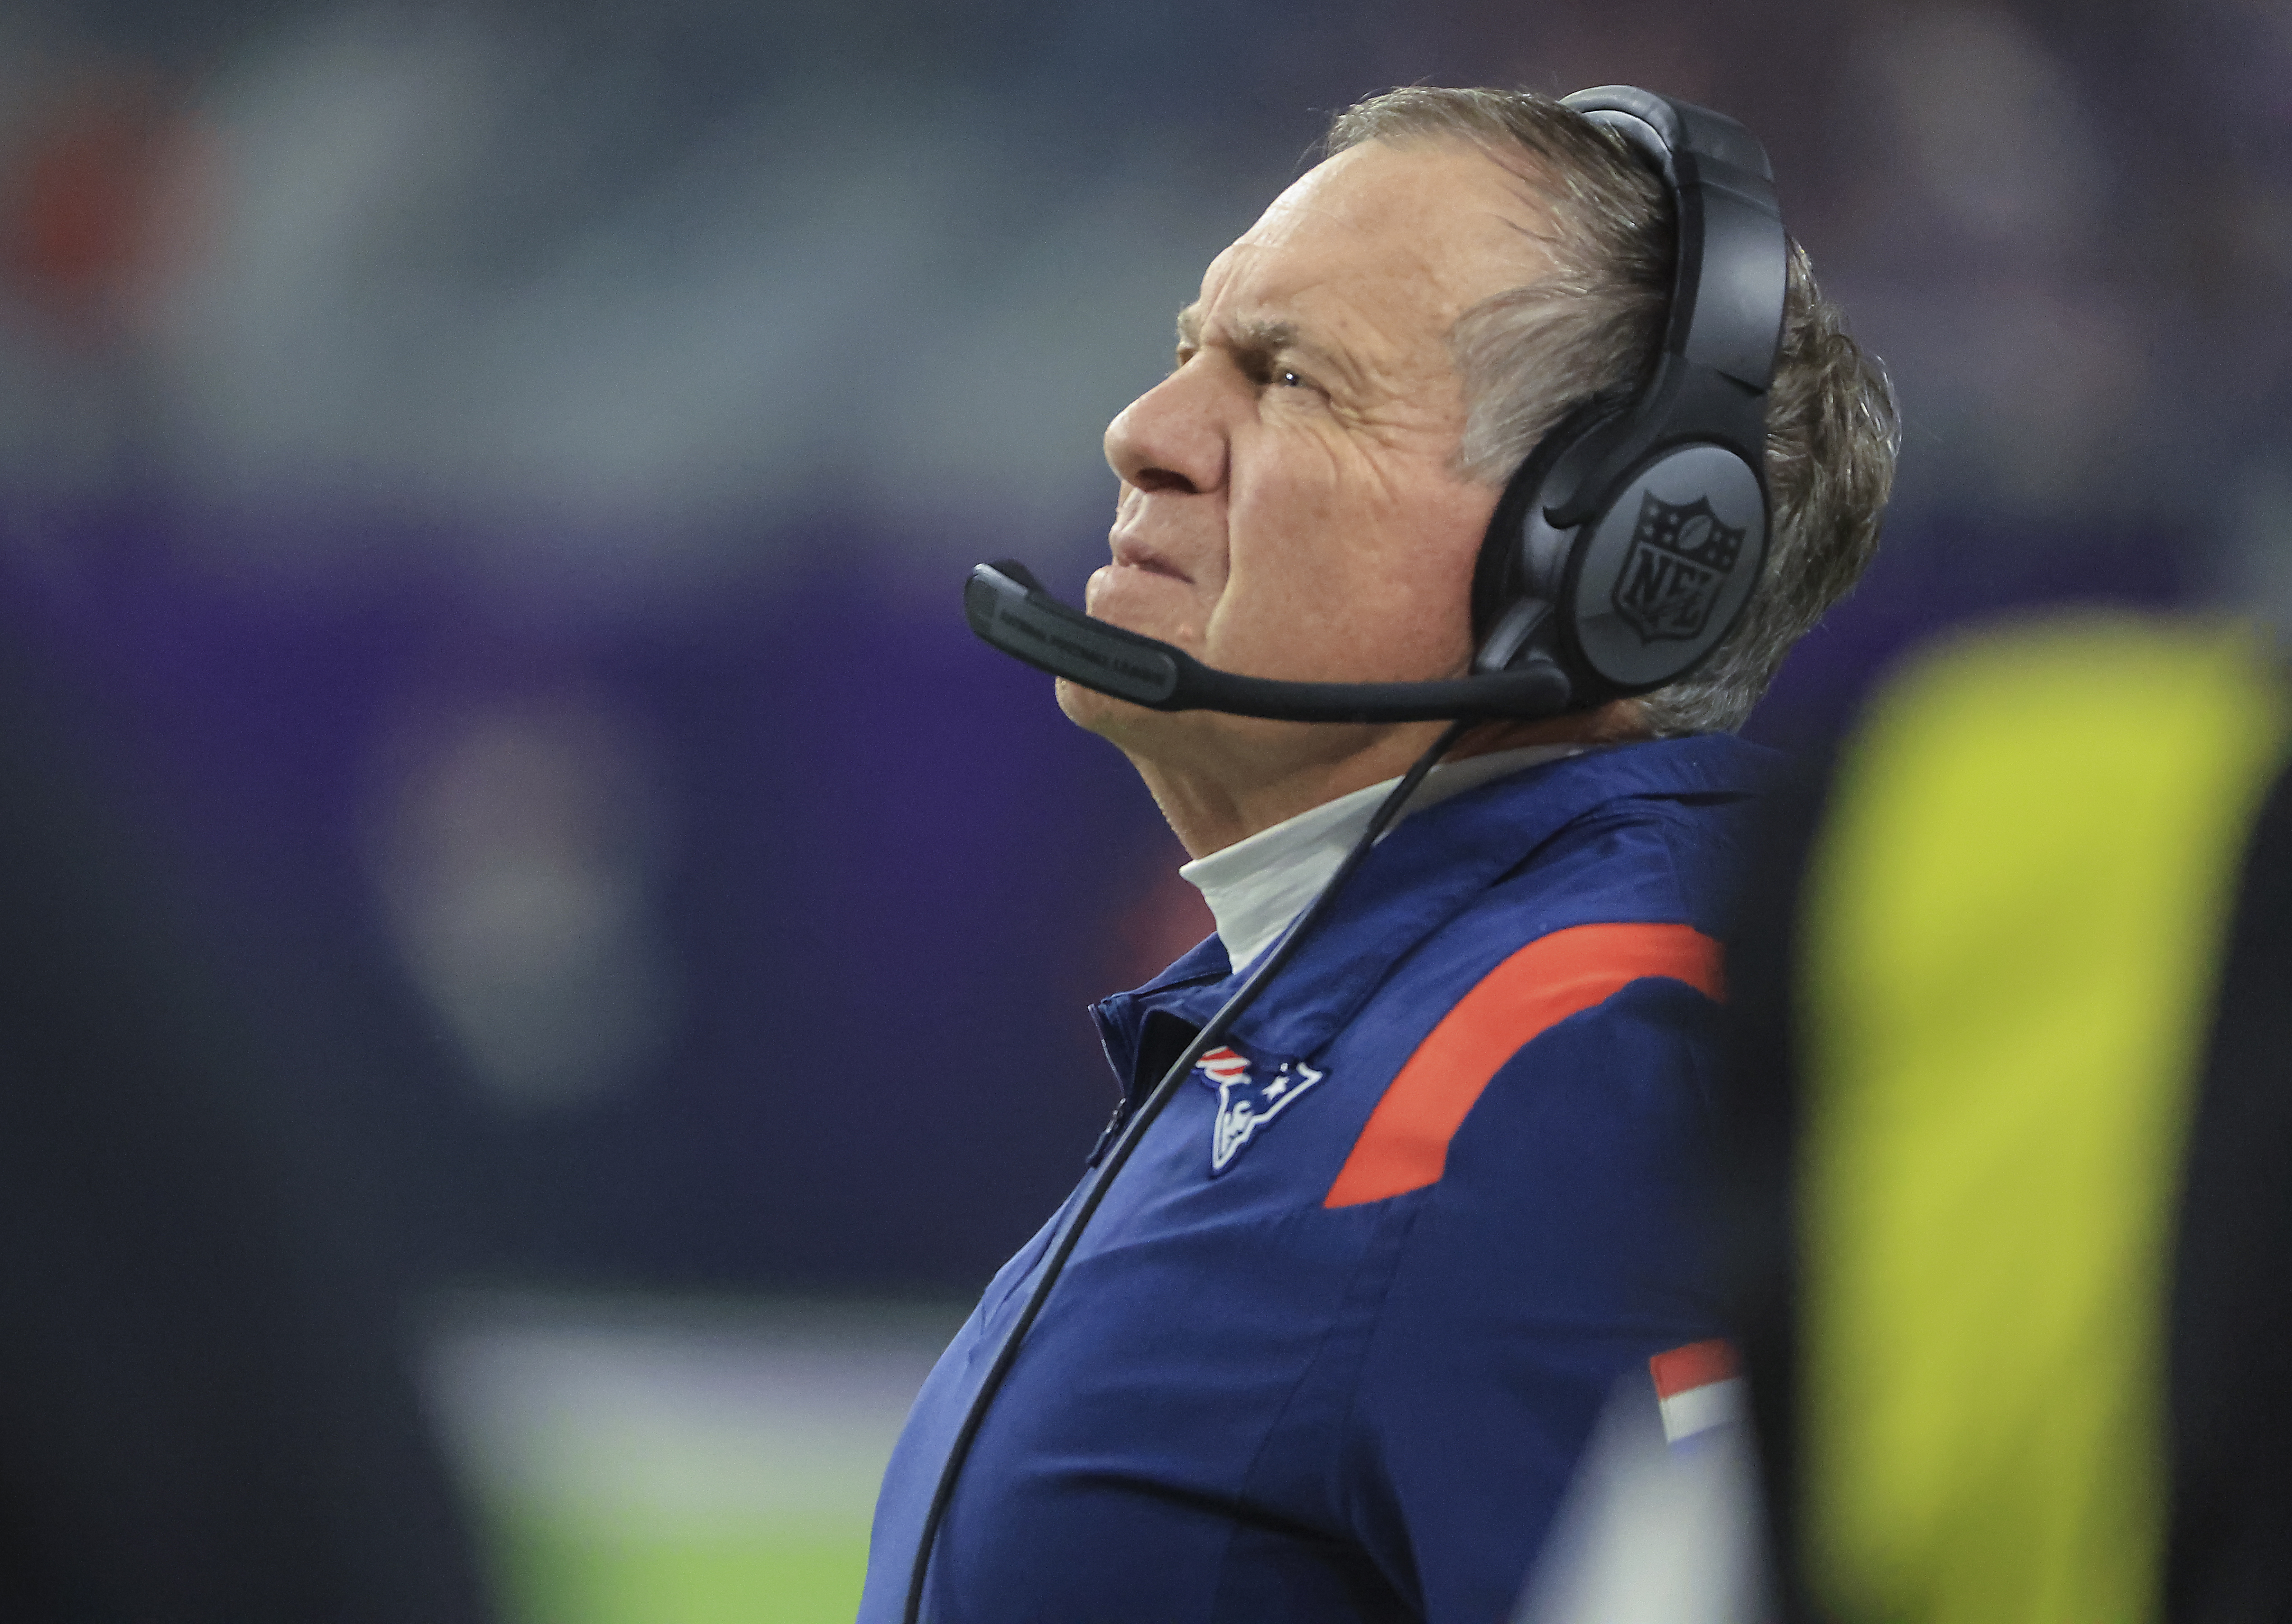 Vikings 33, Patriots 26: New England's furious offense fizzles out in